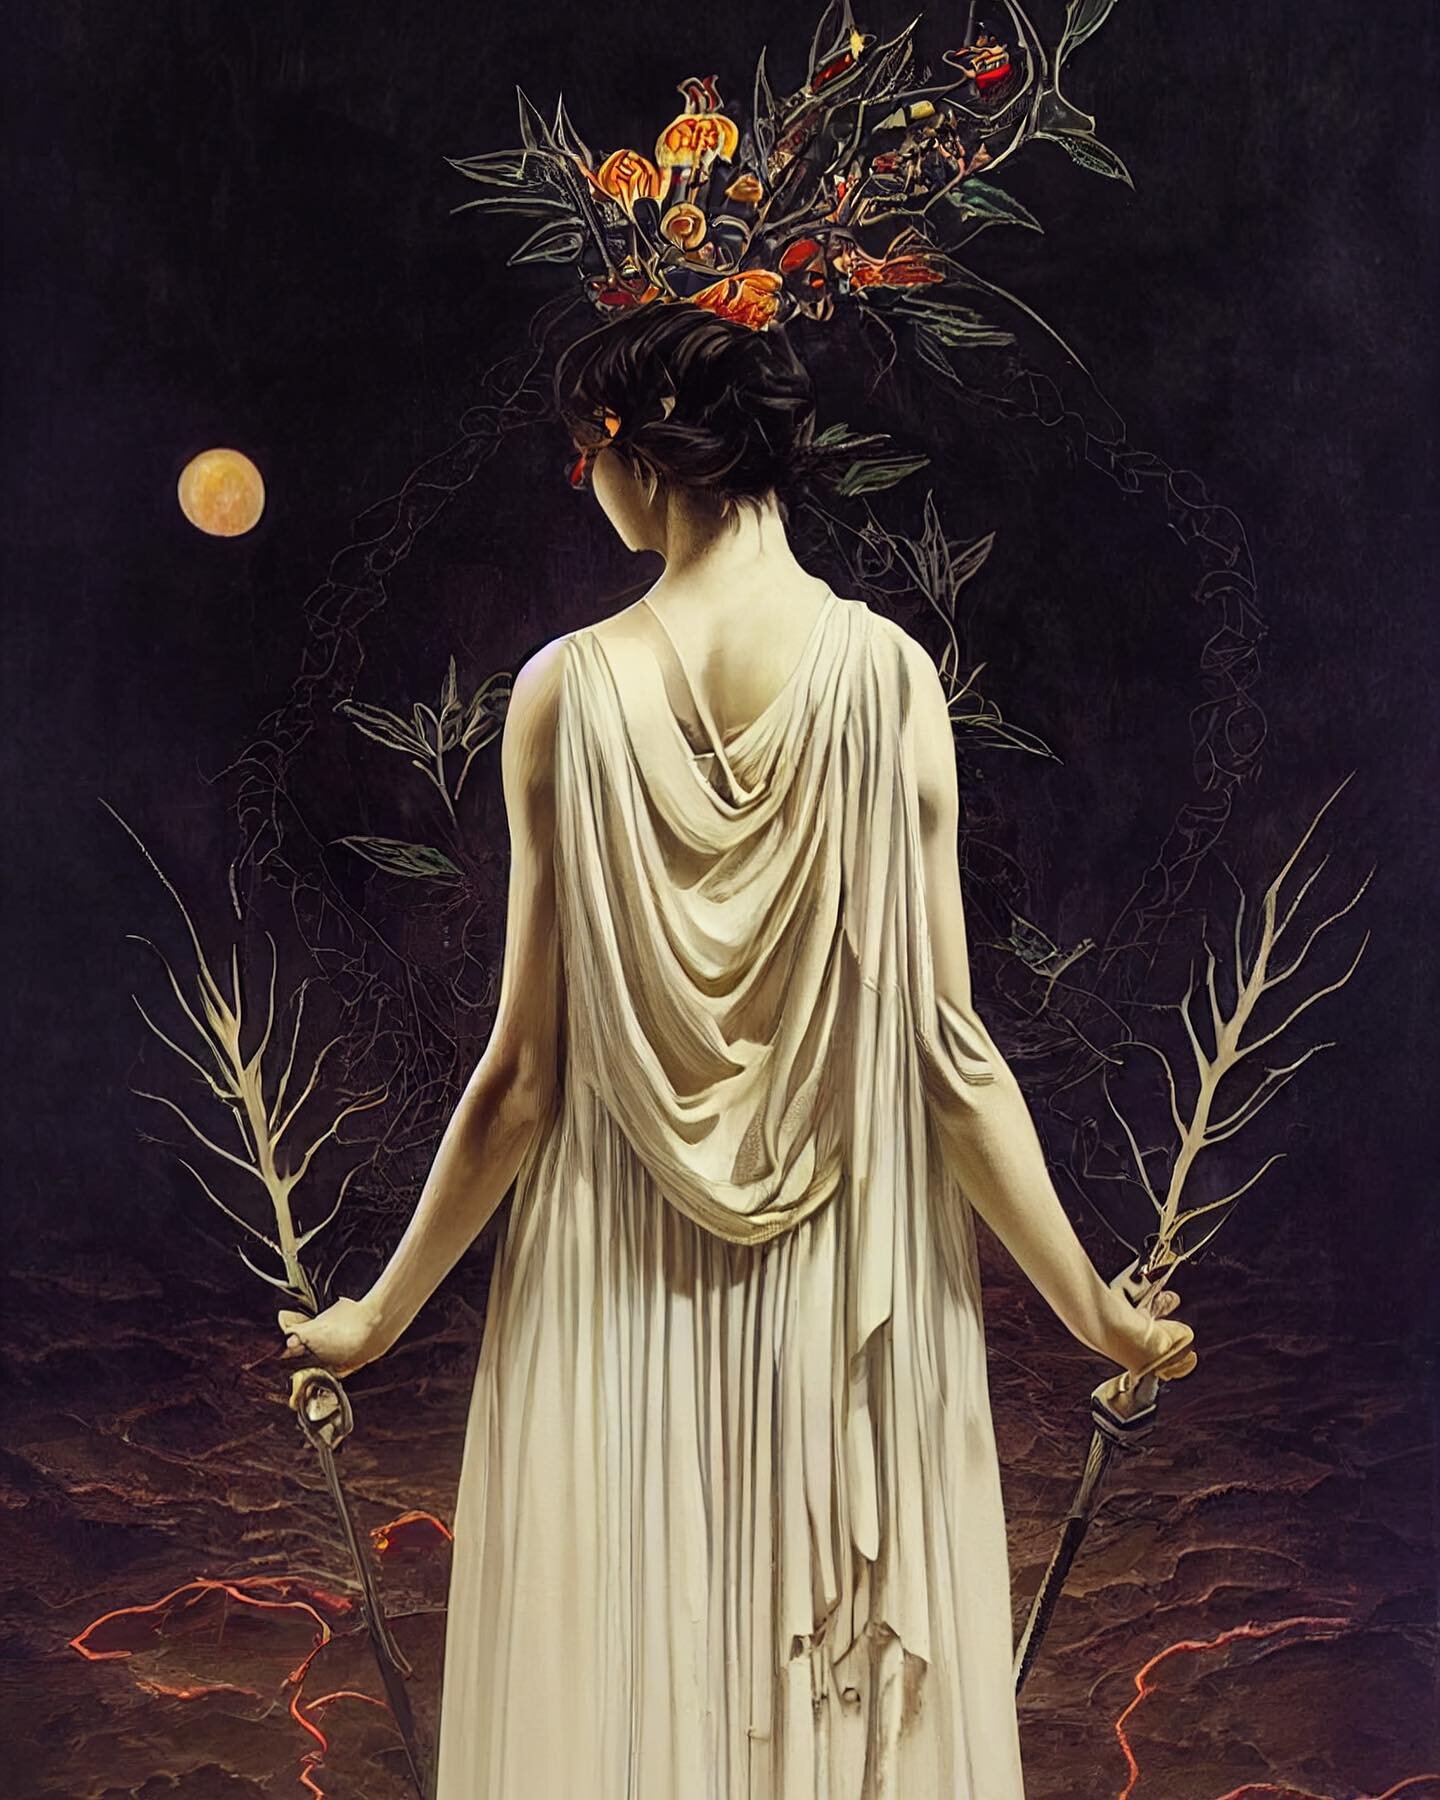 &ldquo;She reigns upon her dusky throne,
&lsquo;Mid shades of heroes dread to see;
Among the dead she breathes alone,
Persephone &mdash; Persephone!&rdquo;
- Persephone, by Jean Ingelow - 1862
.
.
.
#persephone #hades #underworld #mythology #fertilit